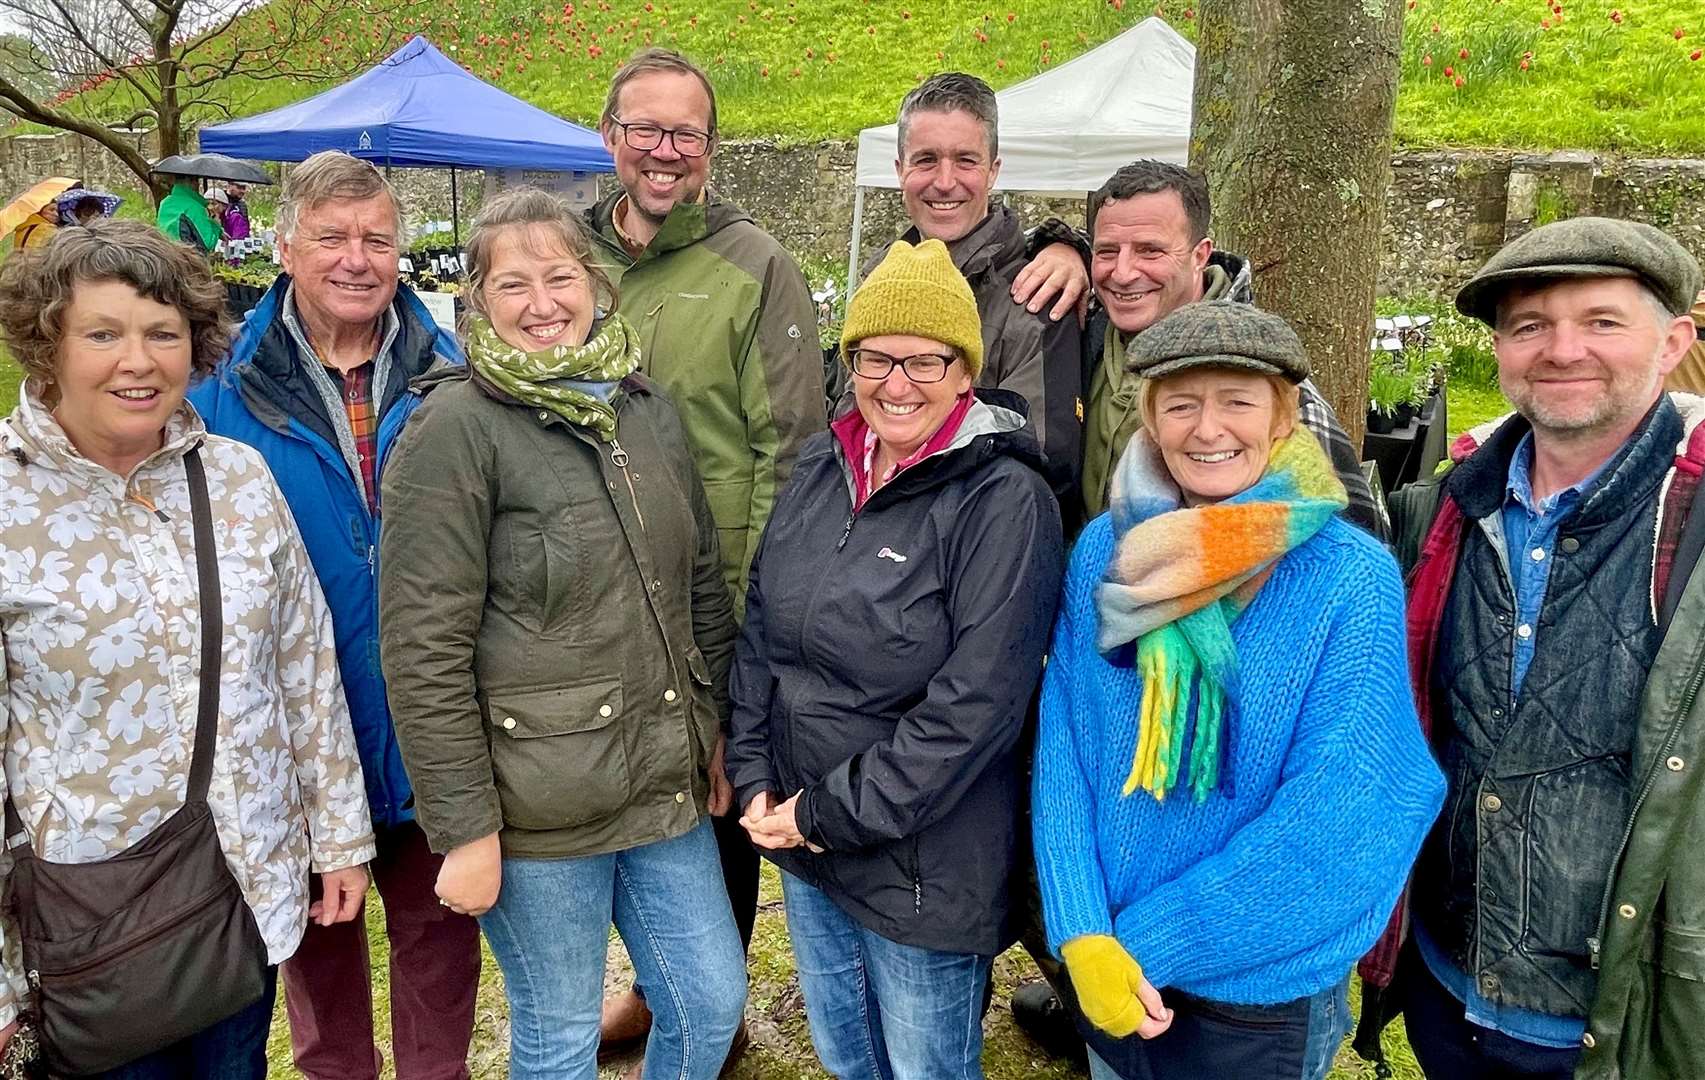 The Plant Fairs Roadshow team who will be displaying their prized nurseries at the Chelsea Flower Show later this month. Picture: Supplied by Vikki Rimmer